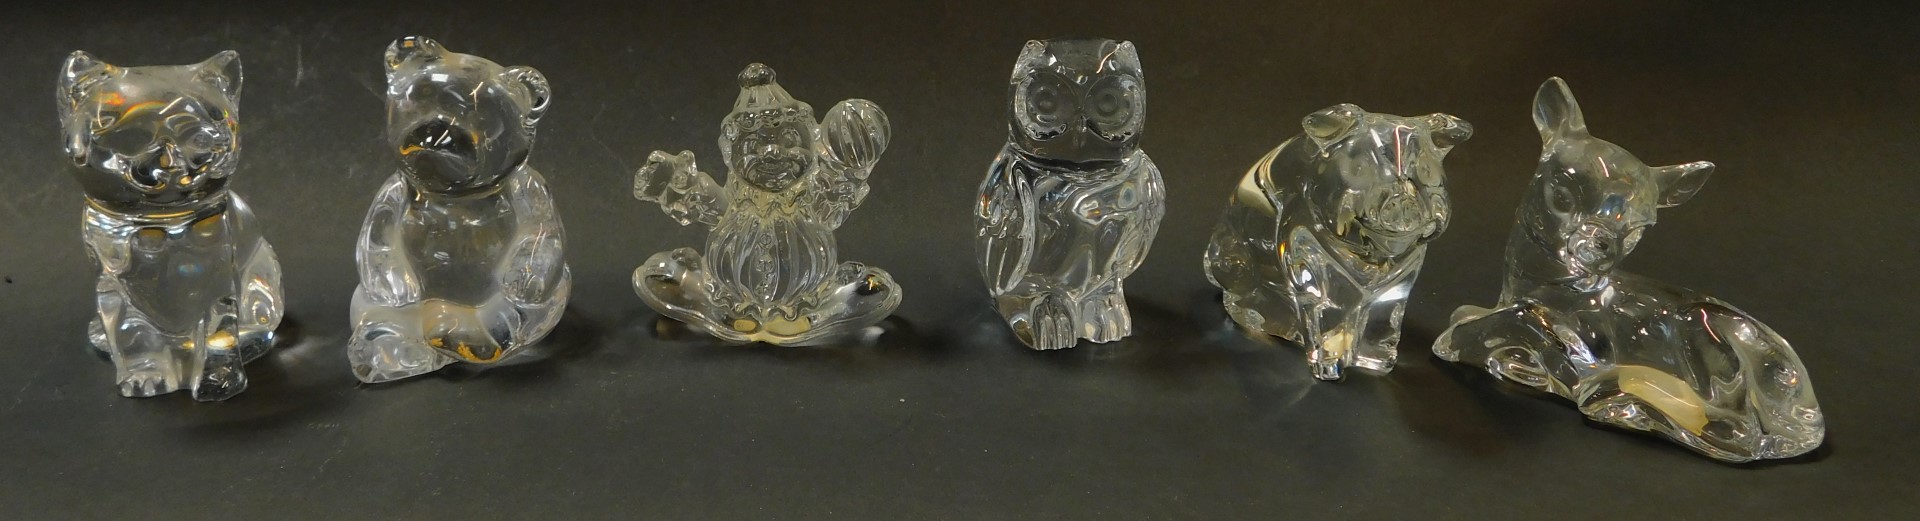 A group of Princess House Crystal Treasures paperweights, modelled as owls, teddy bears, cats, - Image 3 of 6